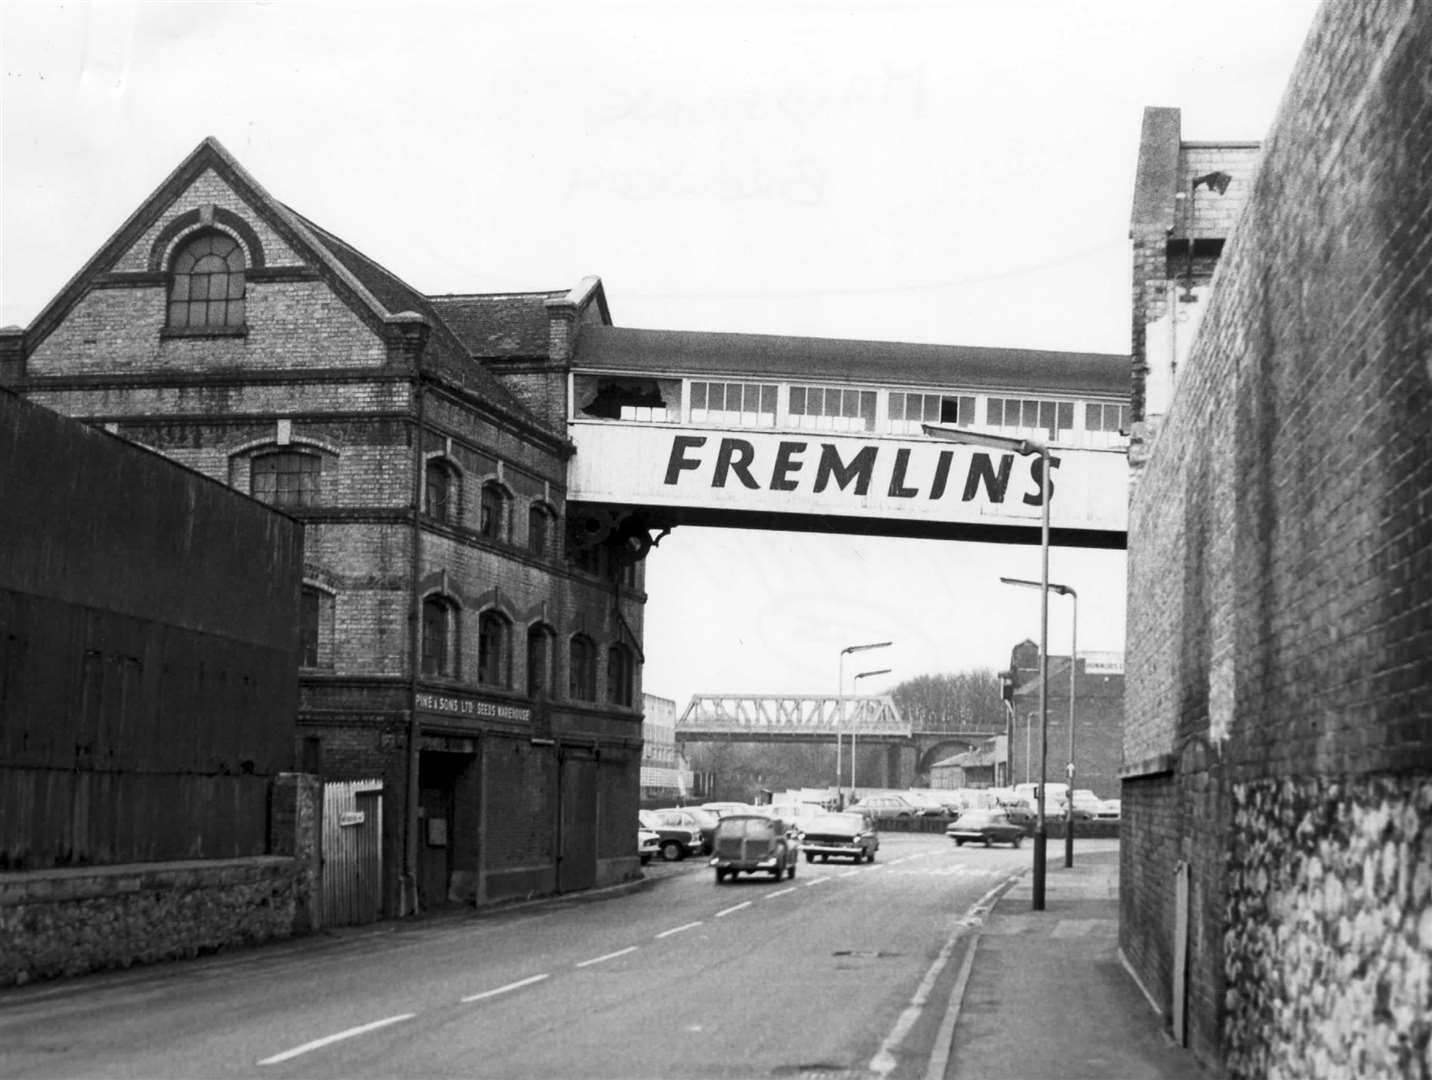 Fremlin’s Brewery in Maidstone in January 1974